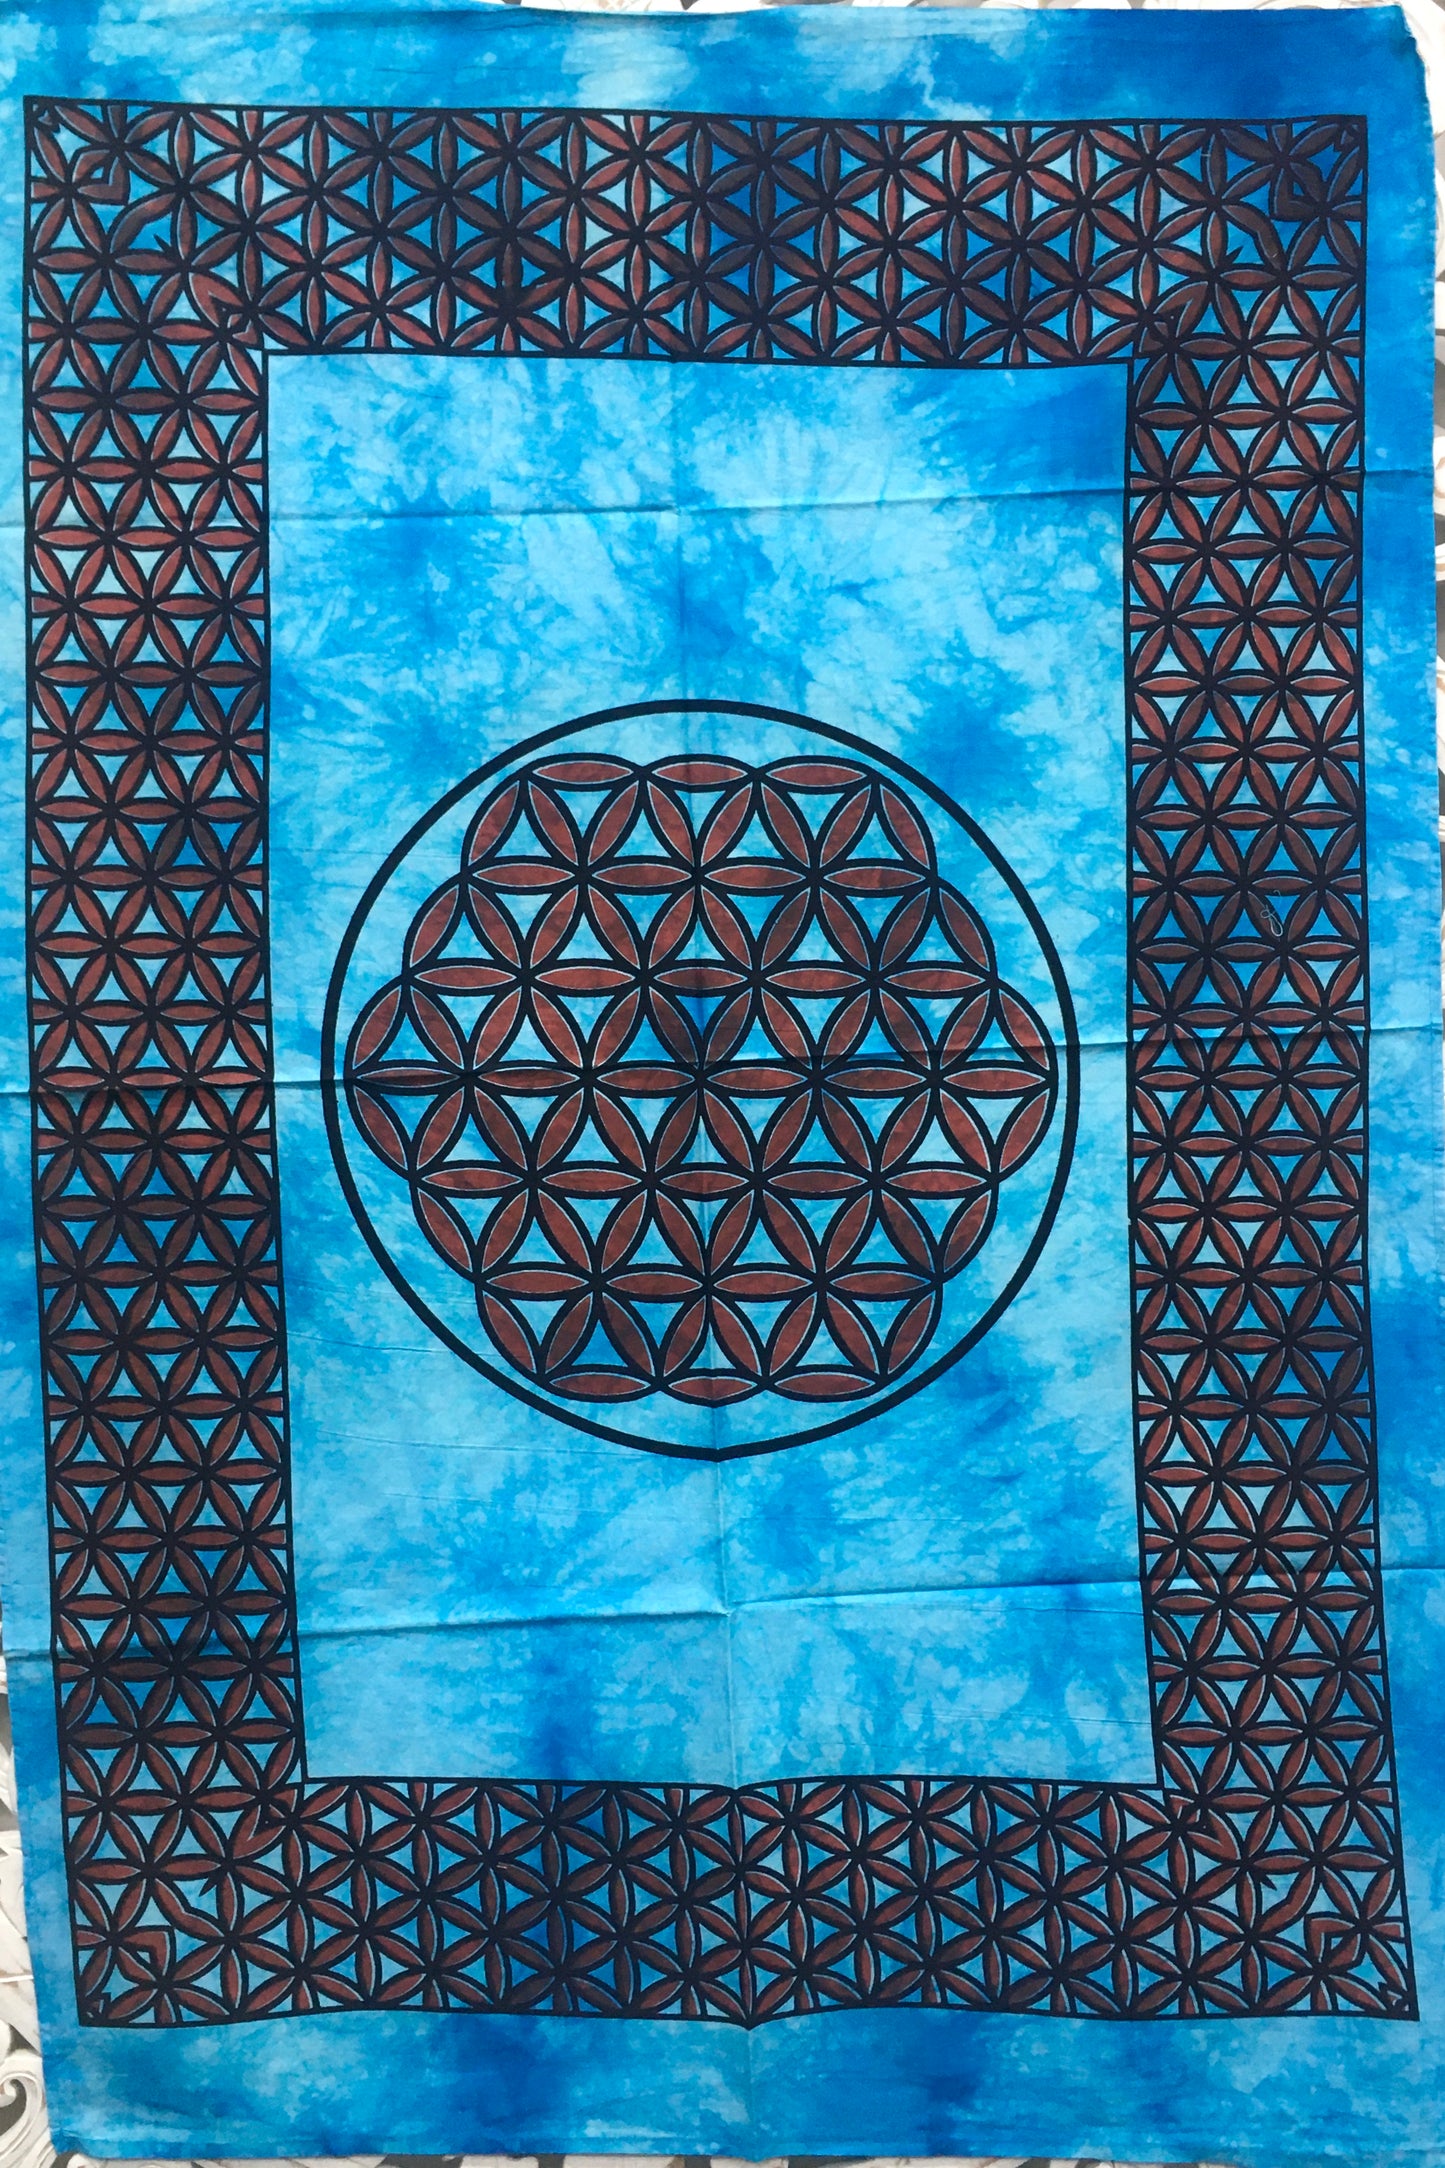 Hand printed fabric poster Flower of Life Tapestries Wall Hanging - 7 colors